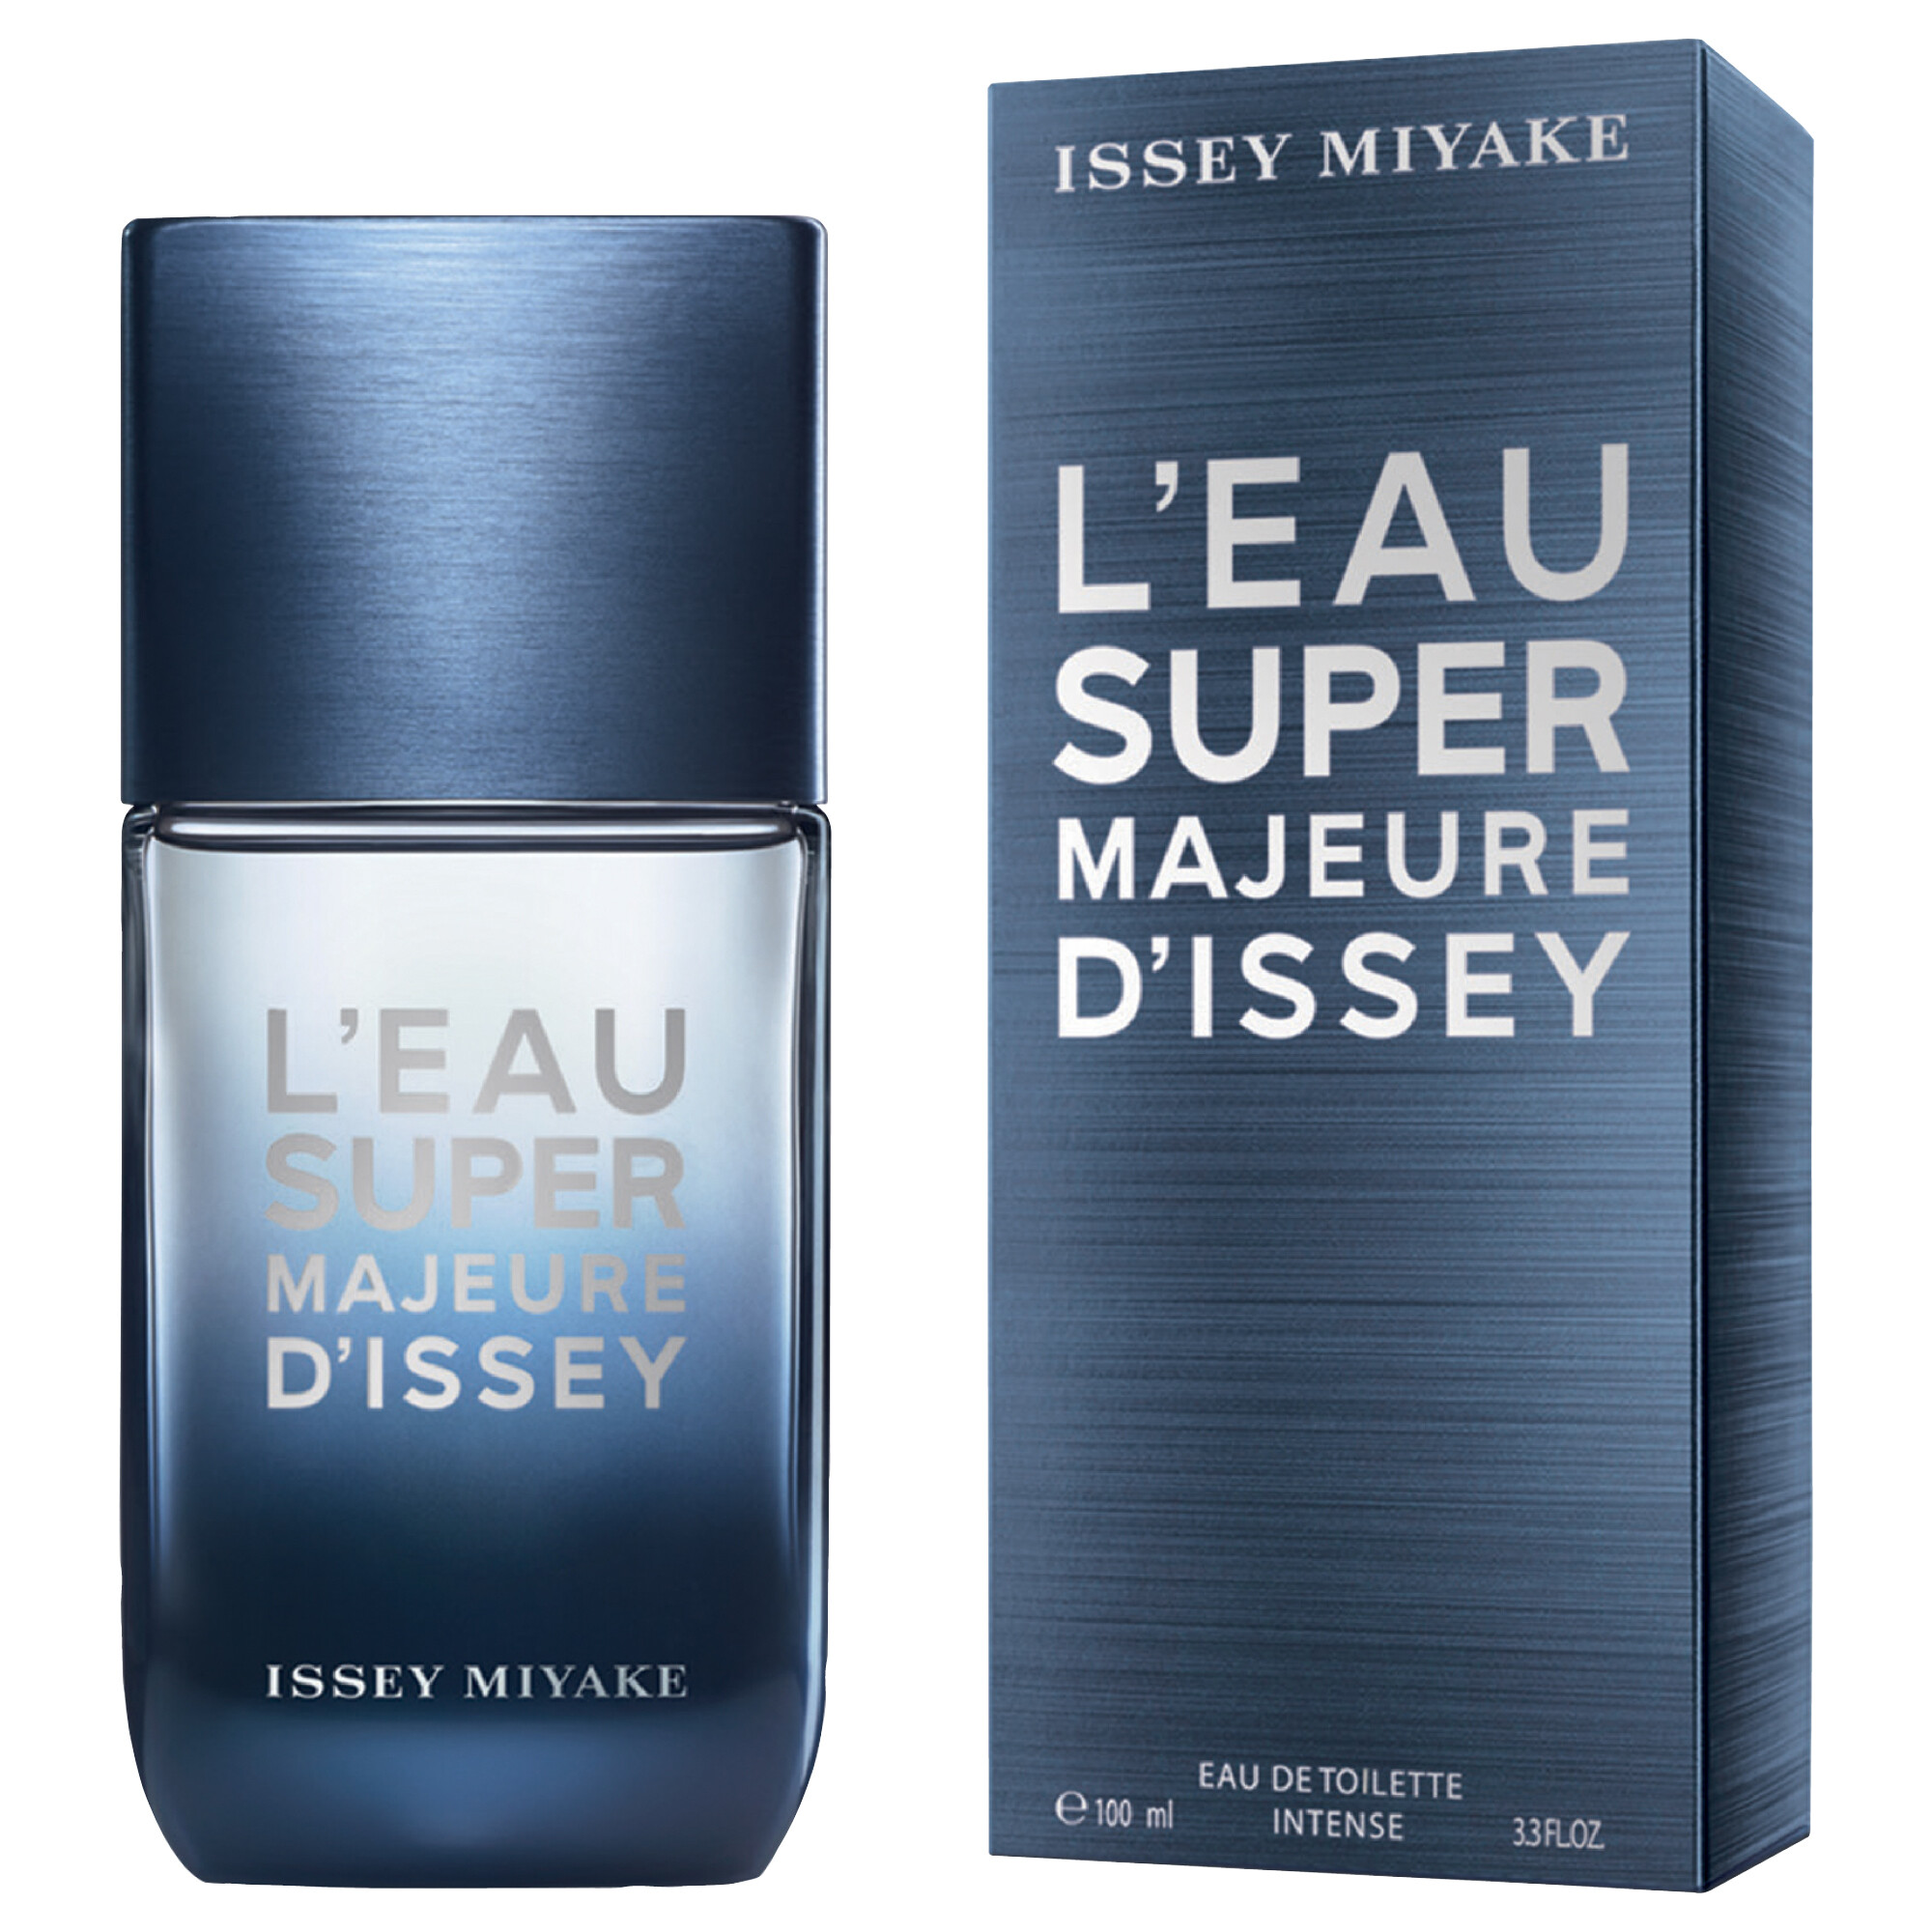 Issey Miyake Issey Miyake L'Eau Super Majeure d'Issey 100ml kaufen